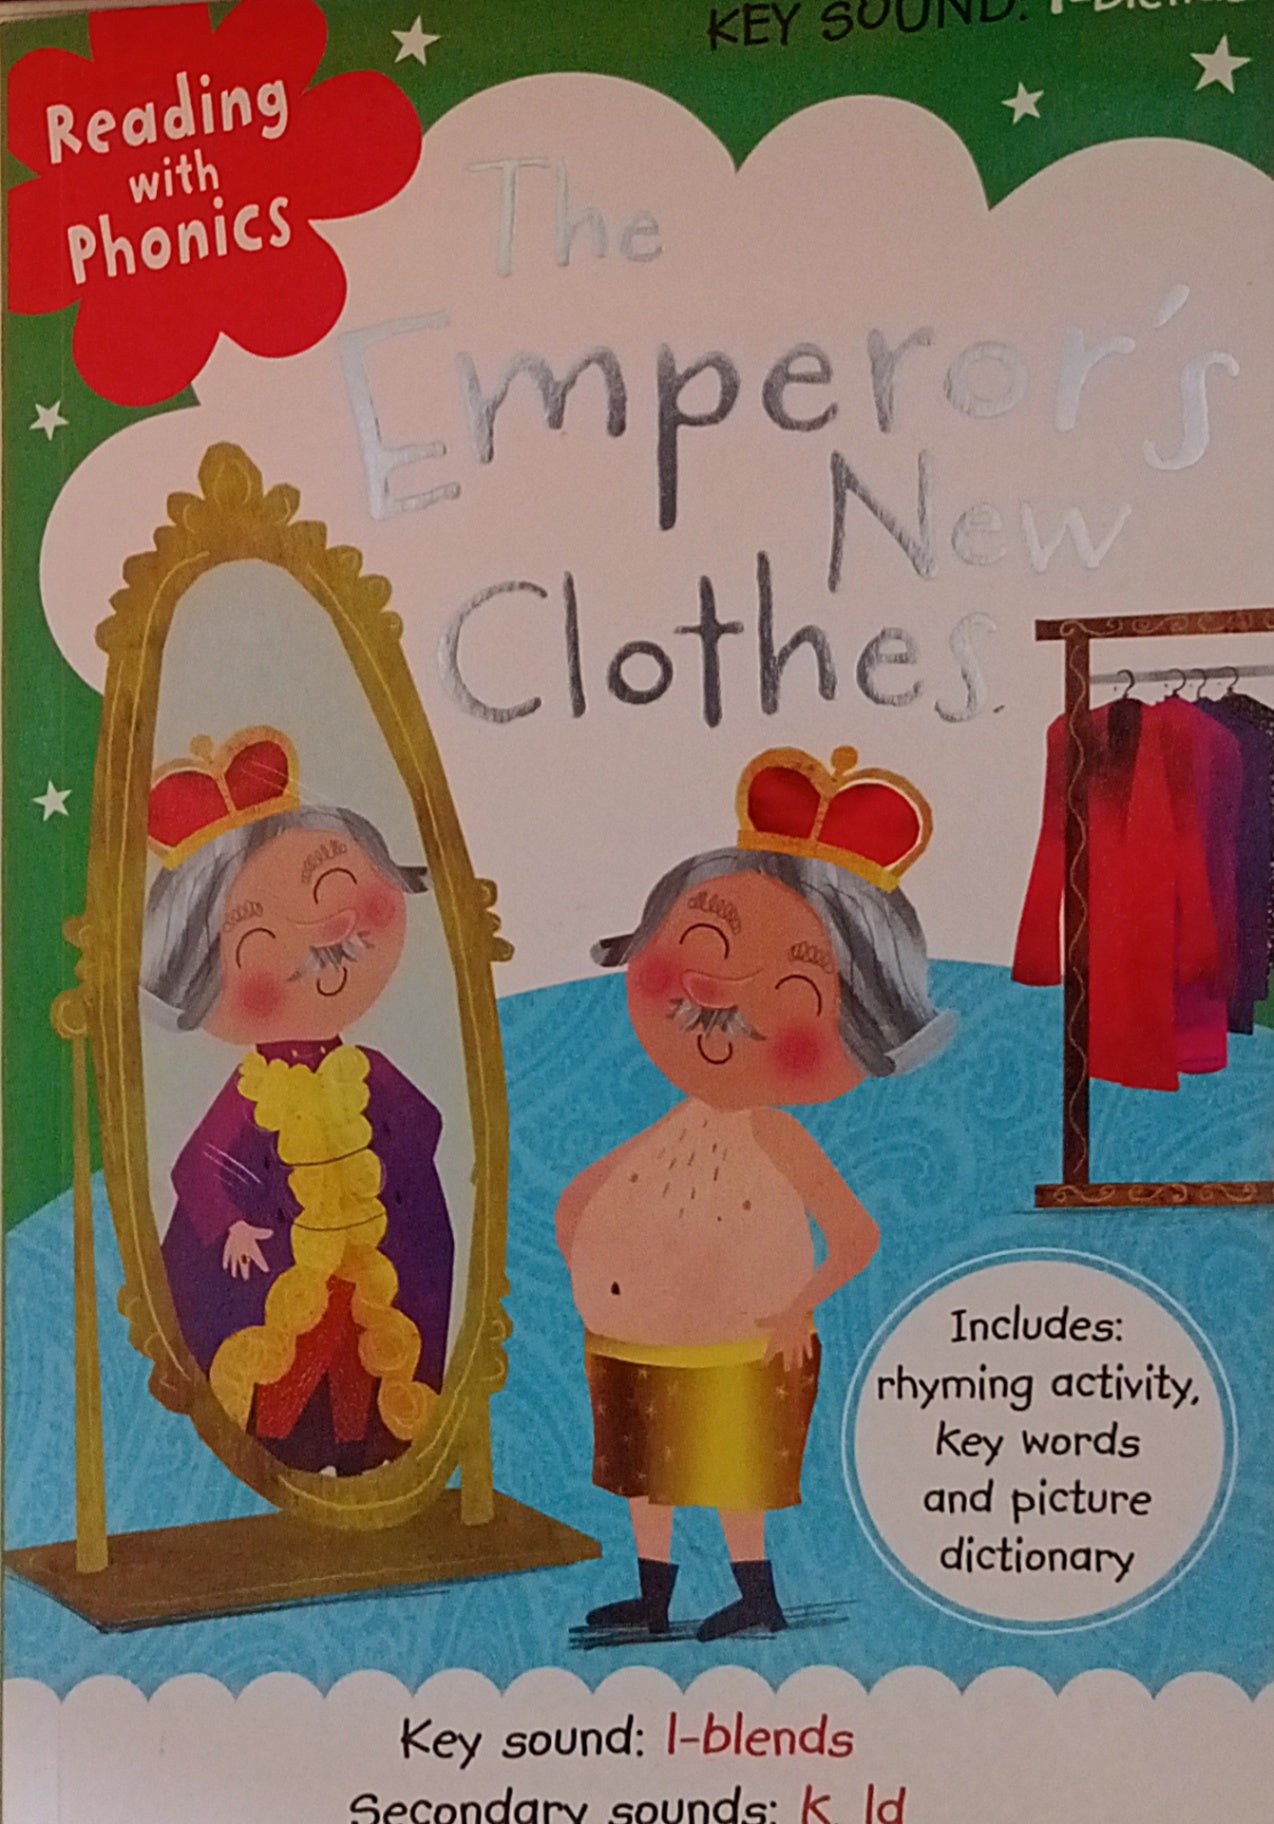 Reading with Phonics-The Emperor's Clothes